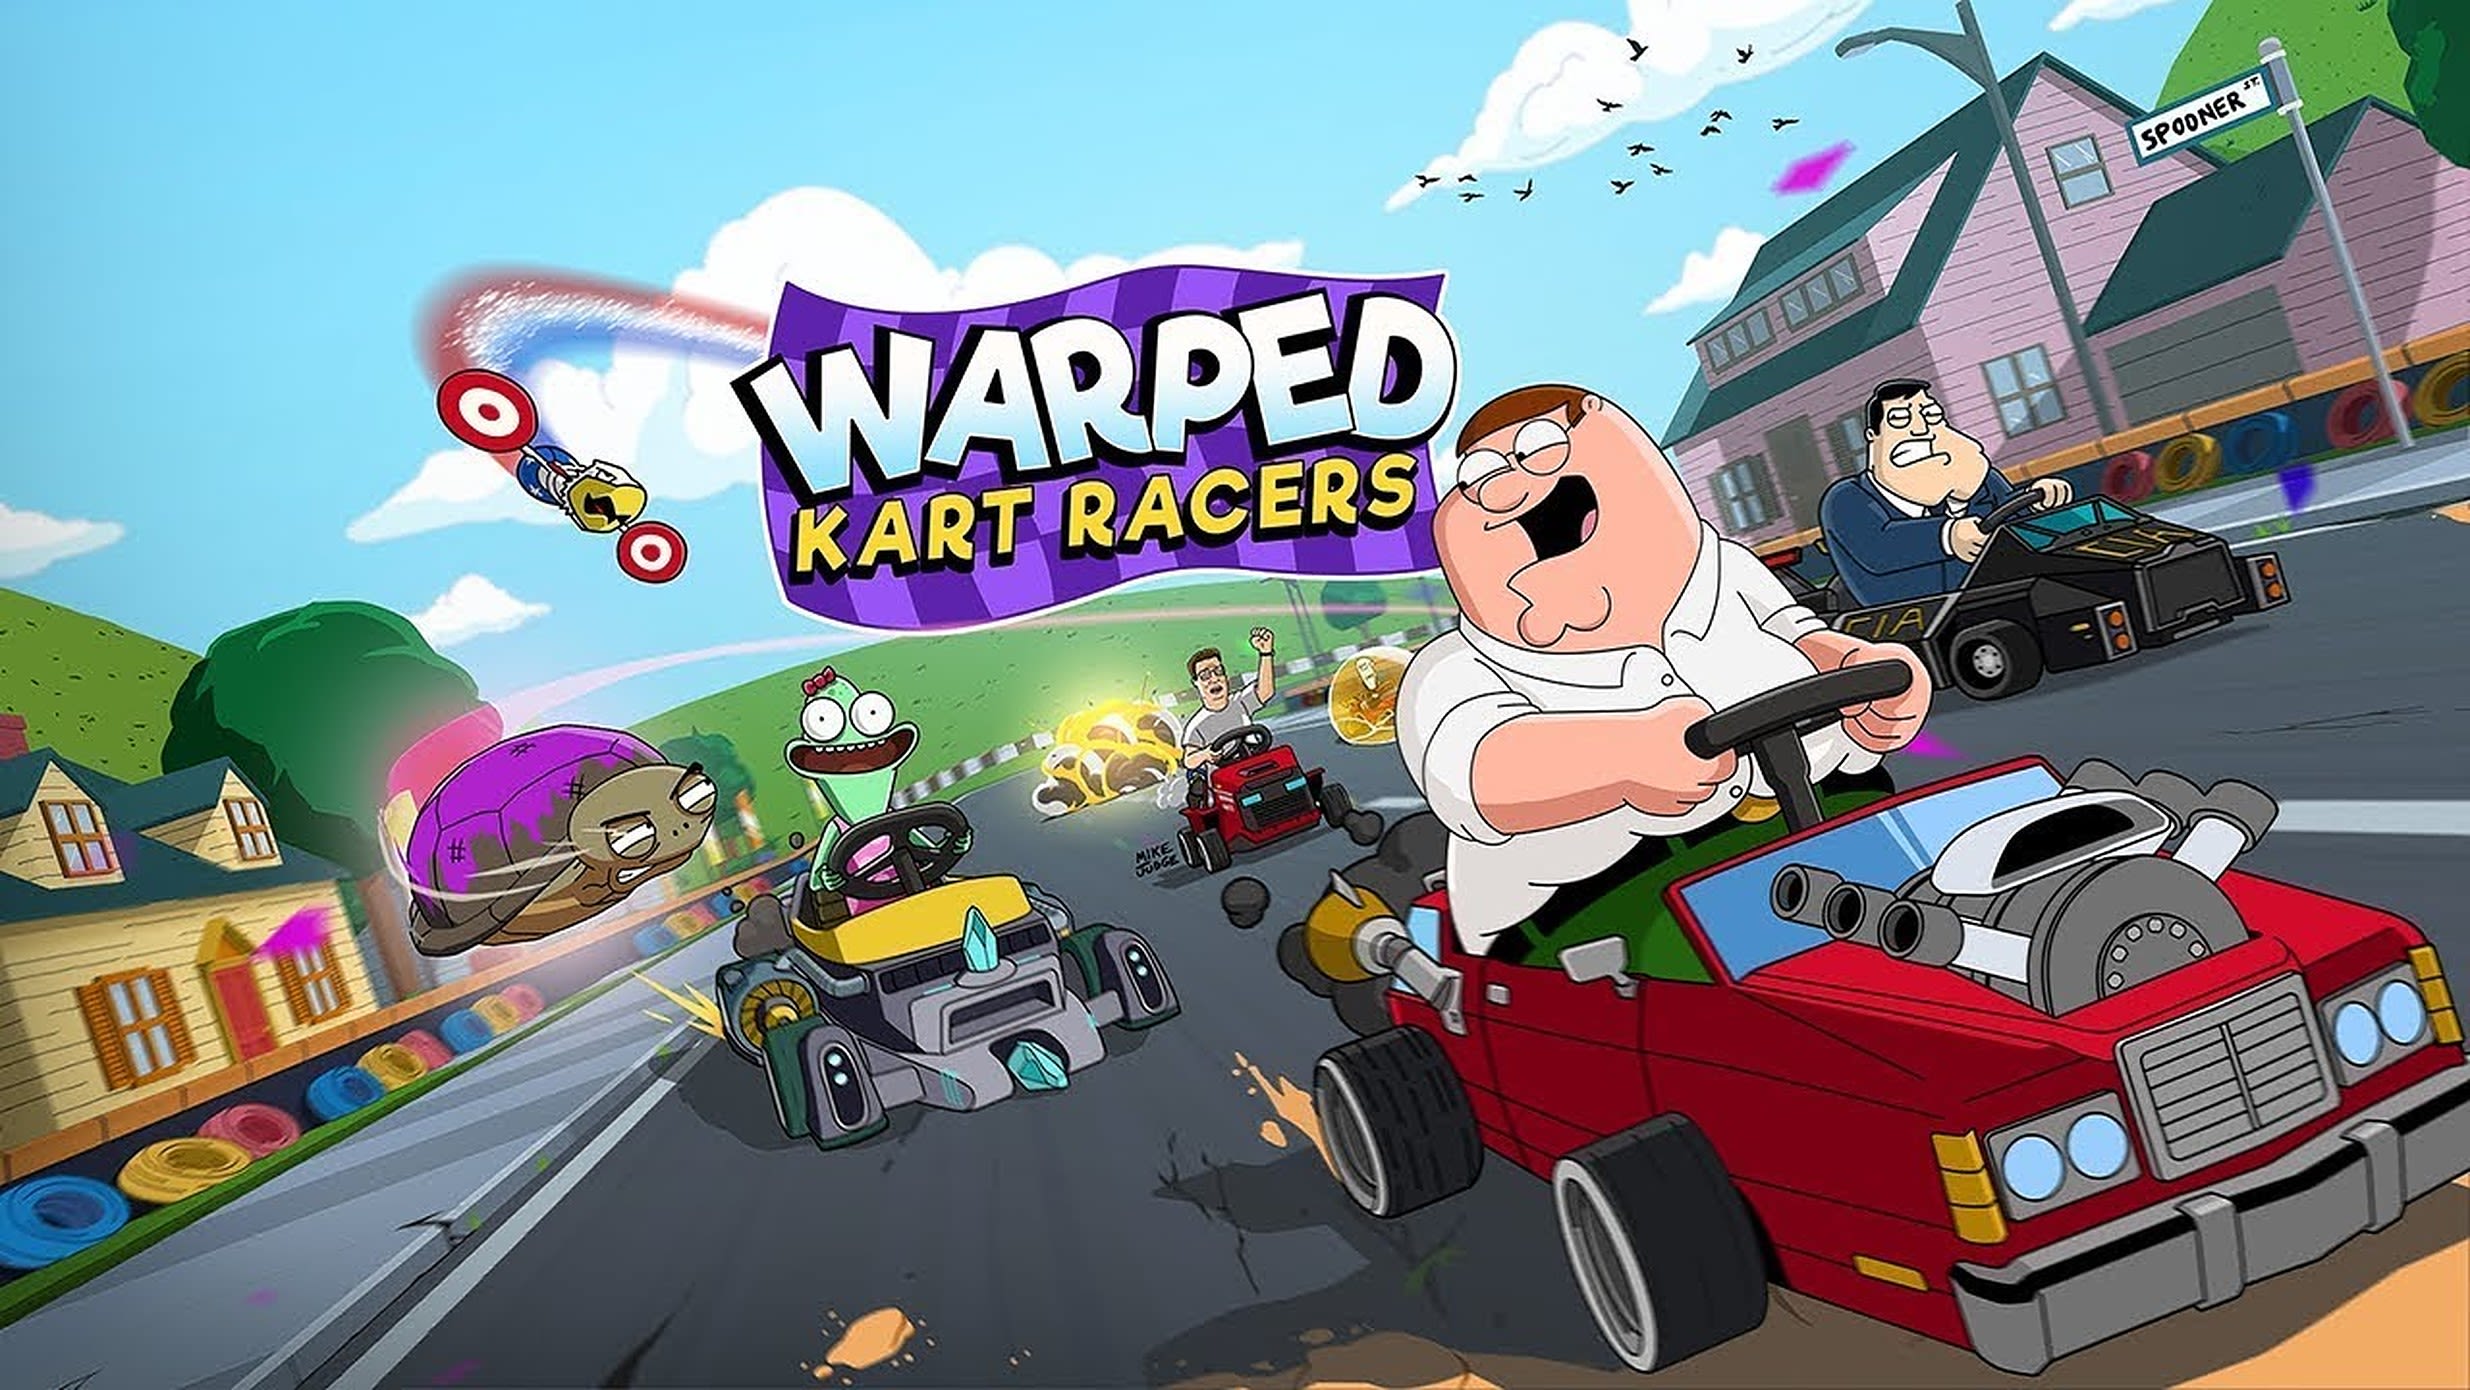 Game On: Peter Griffin and Hank Hill kart racing | CNN